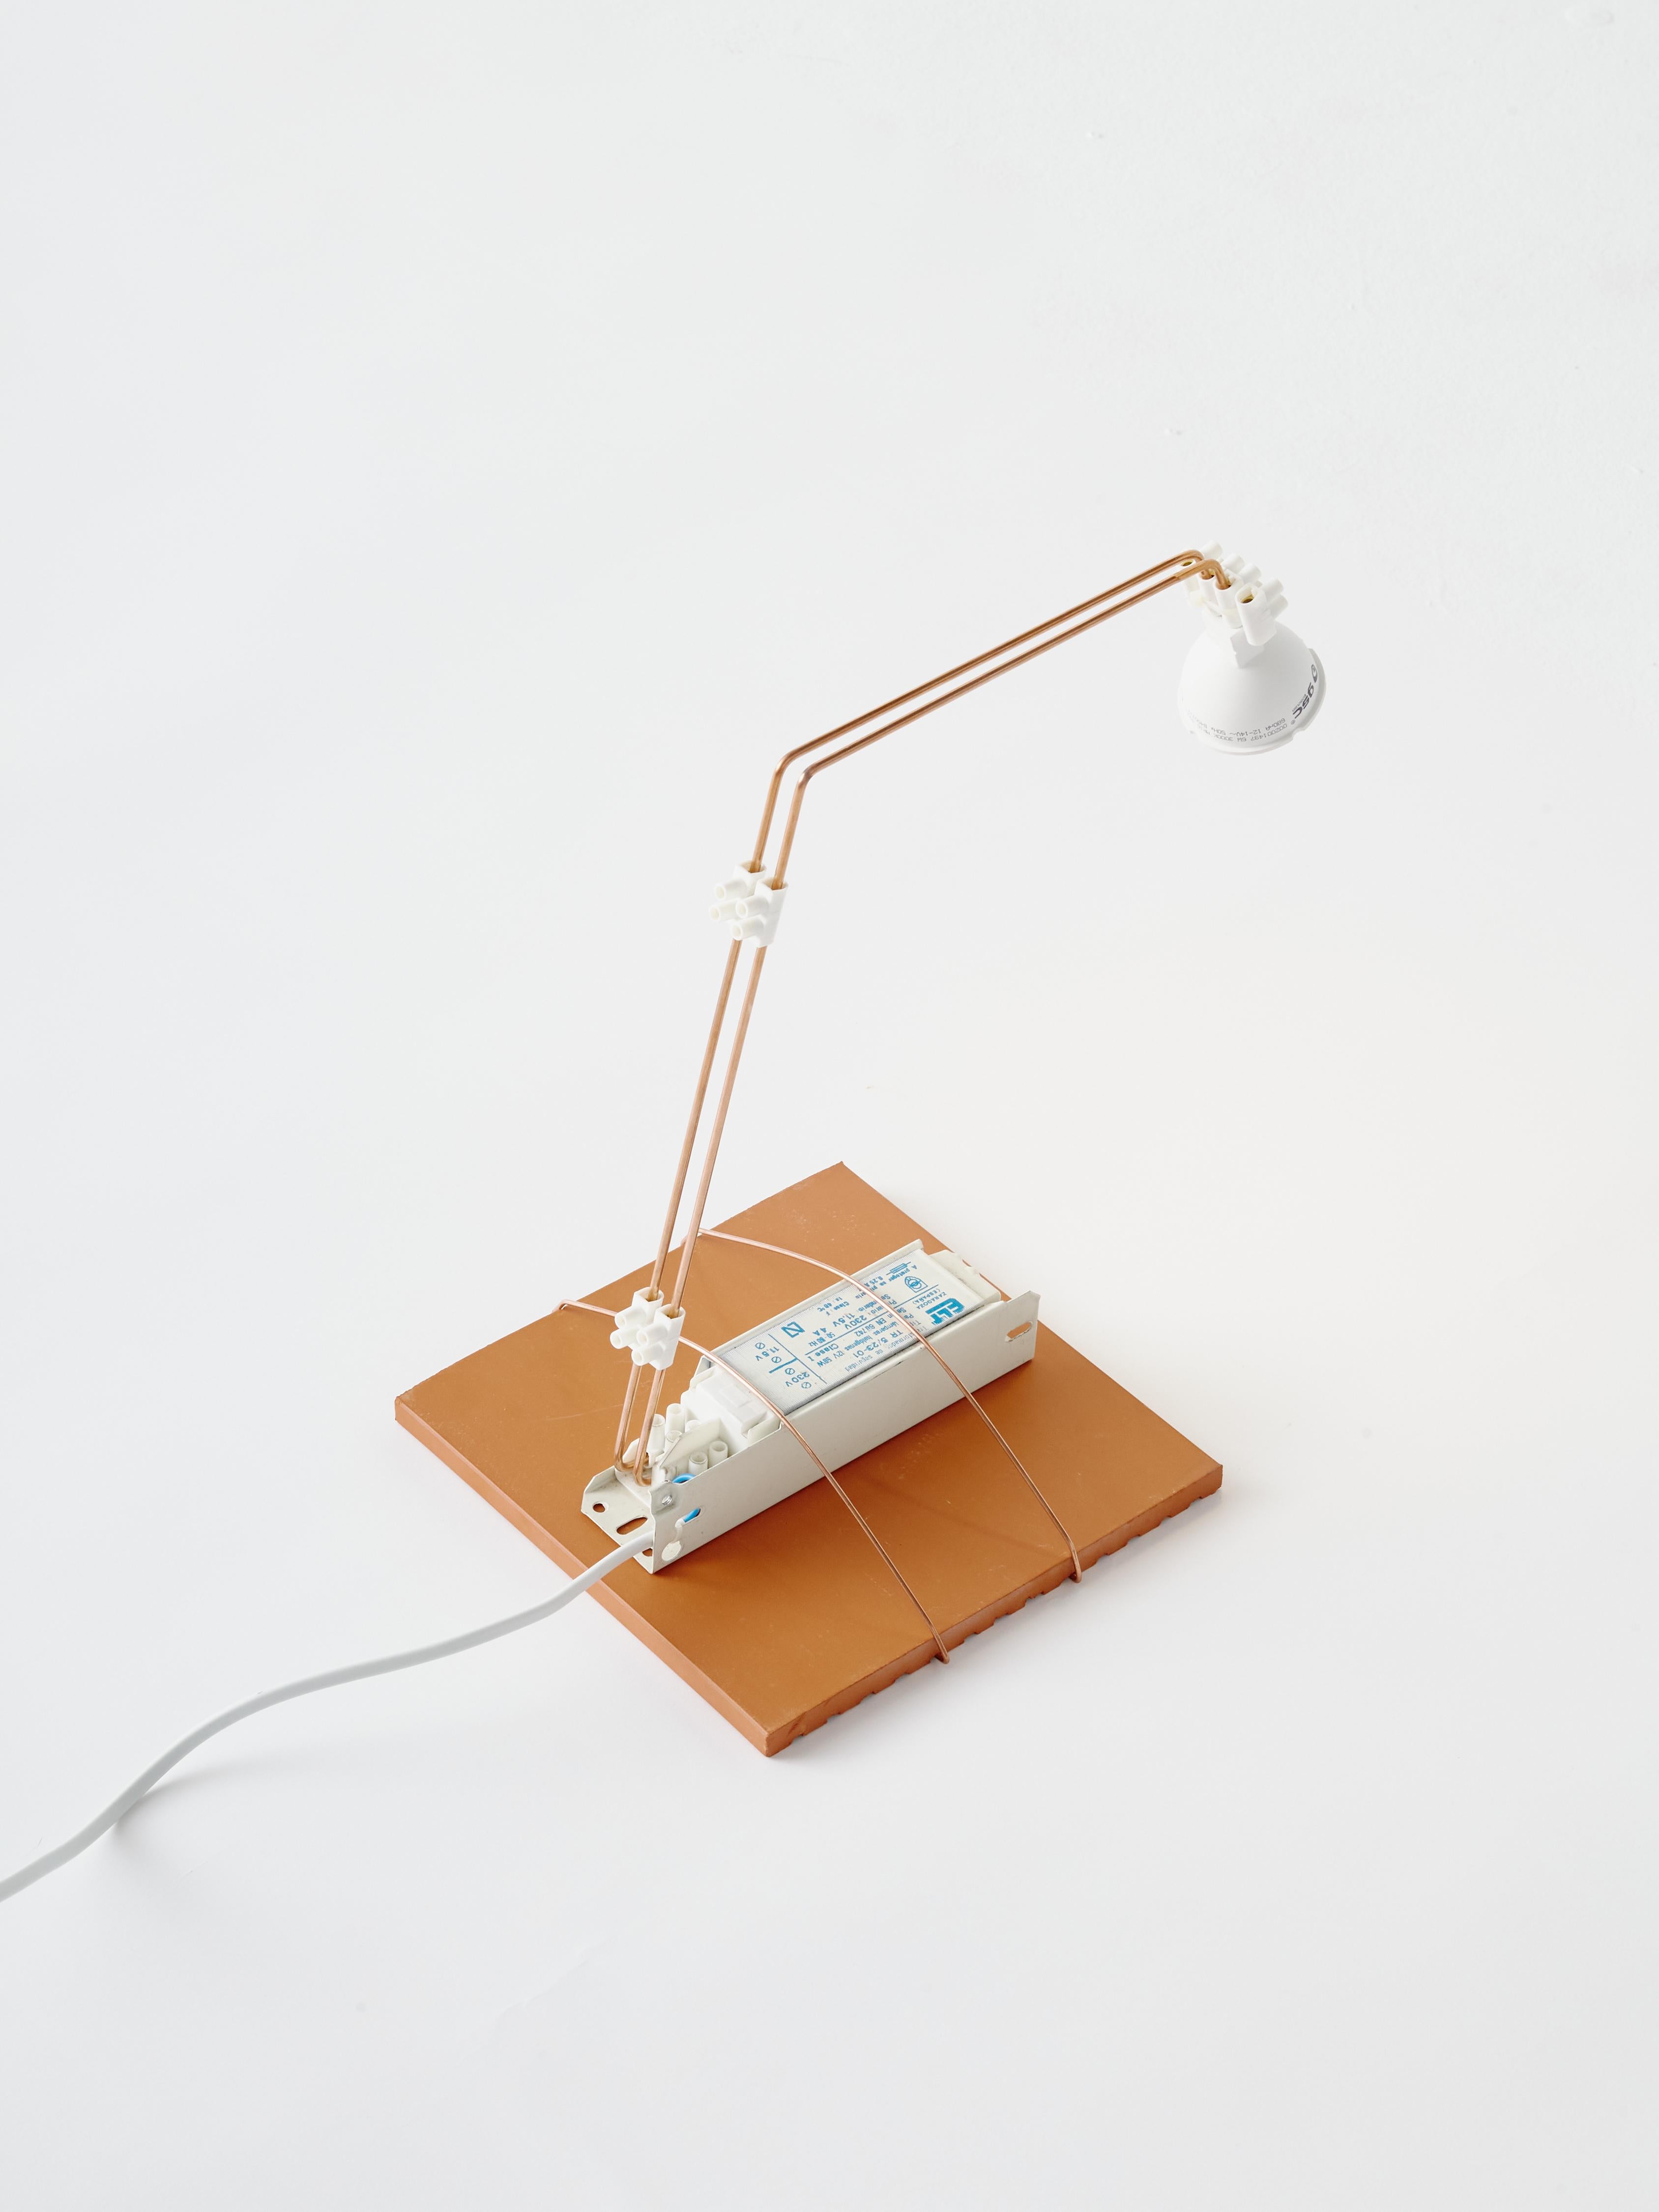 B.A.R.E 'Small Simple' Table Lamp is a piece that forms part of the serie Brick, Appliances, Rods and Electricity (B.A.R.E). This collection of lamps is produced with bricks or tiles on the bases, from which iron rod structures and electric quick